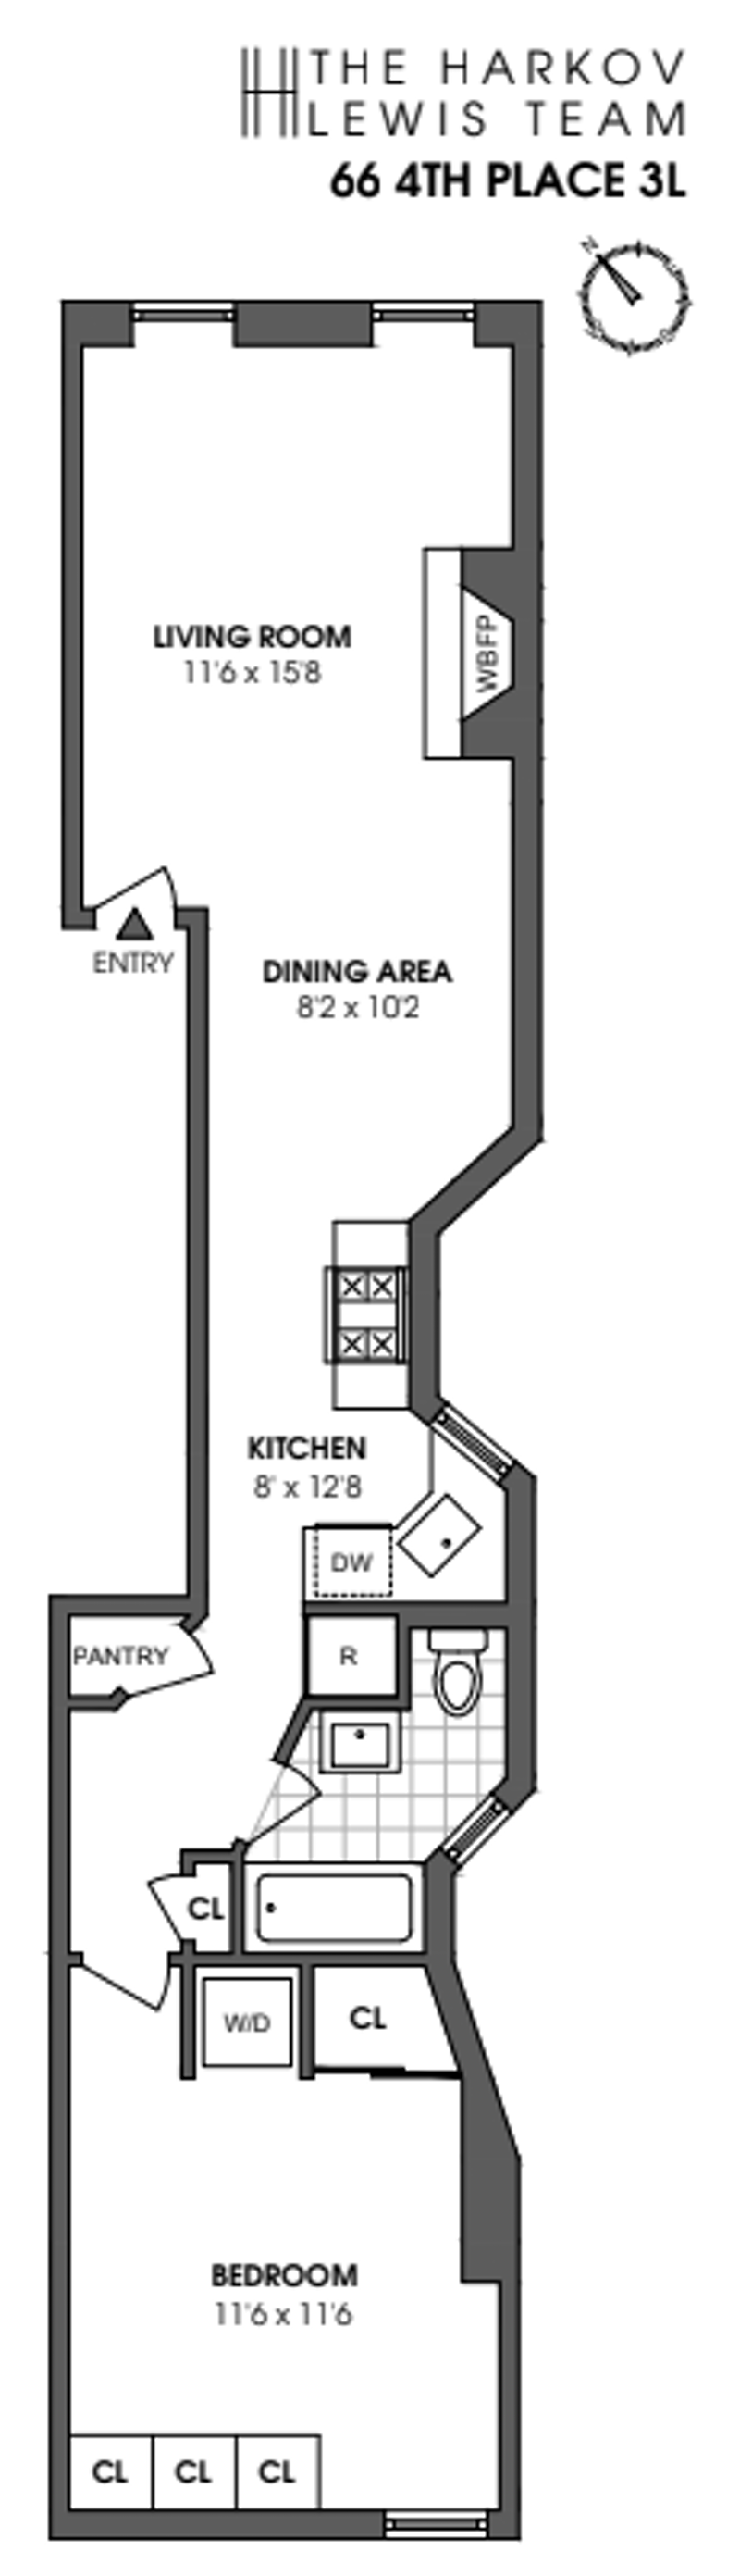 Floorplan for 66 4th Place, 3L